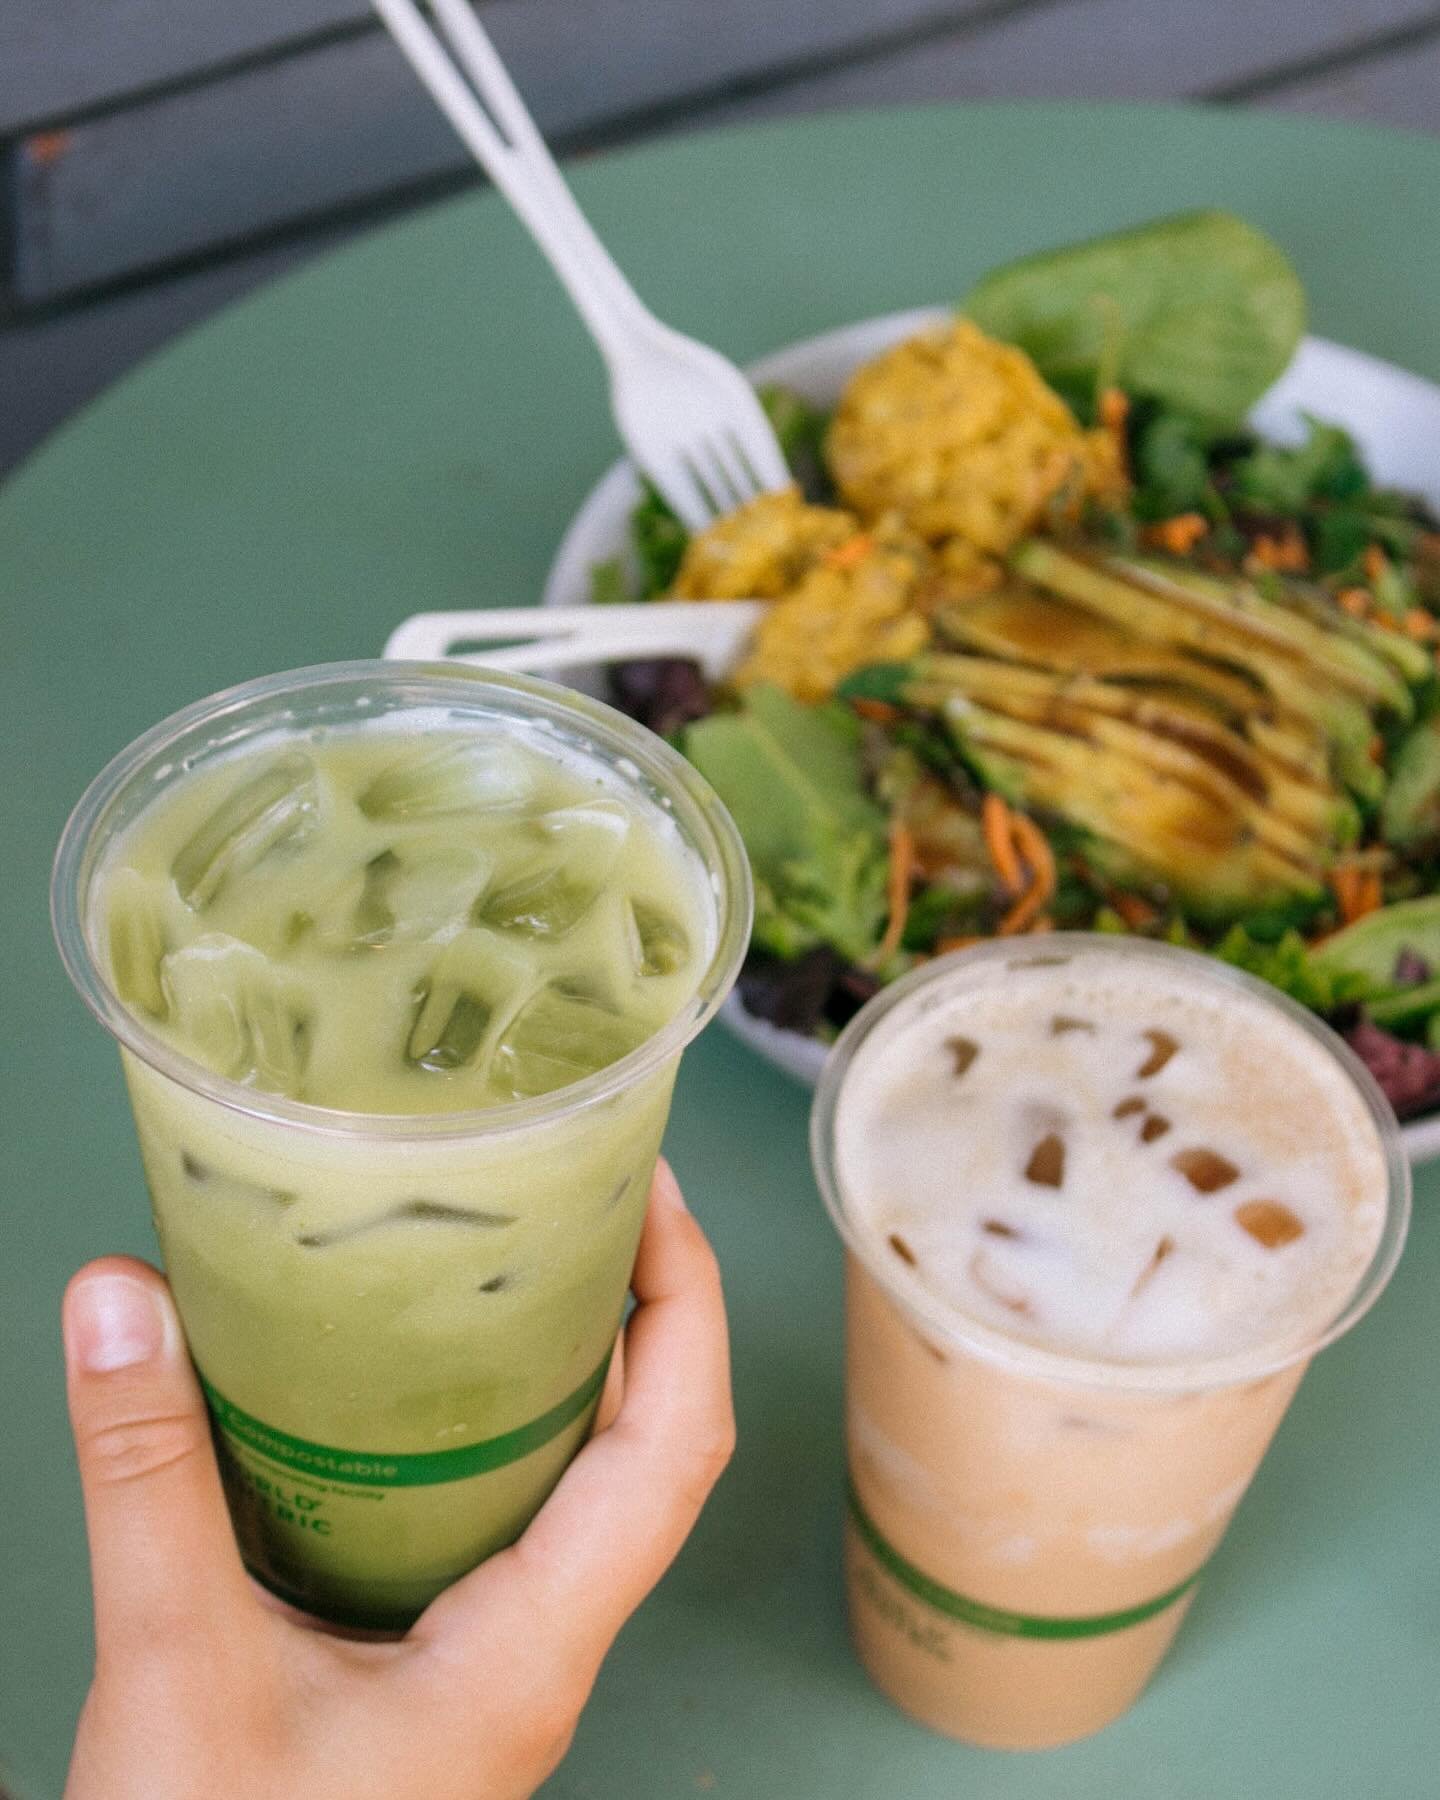 Looking for something fresh on your spring day?! 👀🫶🏻
From our house-made and natural ingredient salads, to our unique Spring Orange Rosemary Matcha, switch things up with something refreshing today! 🌱🍃💗We like to keep things new and different f